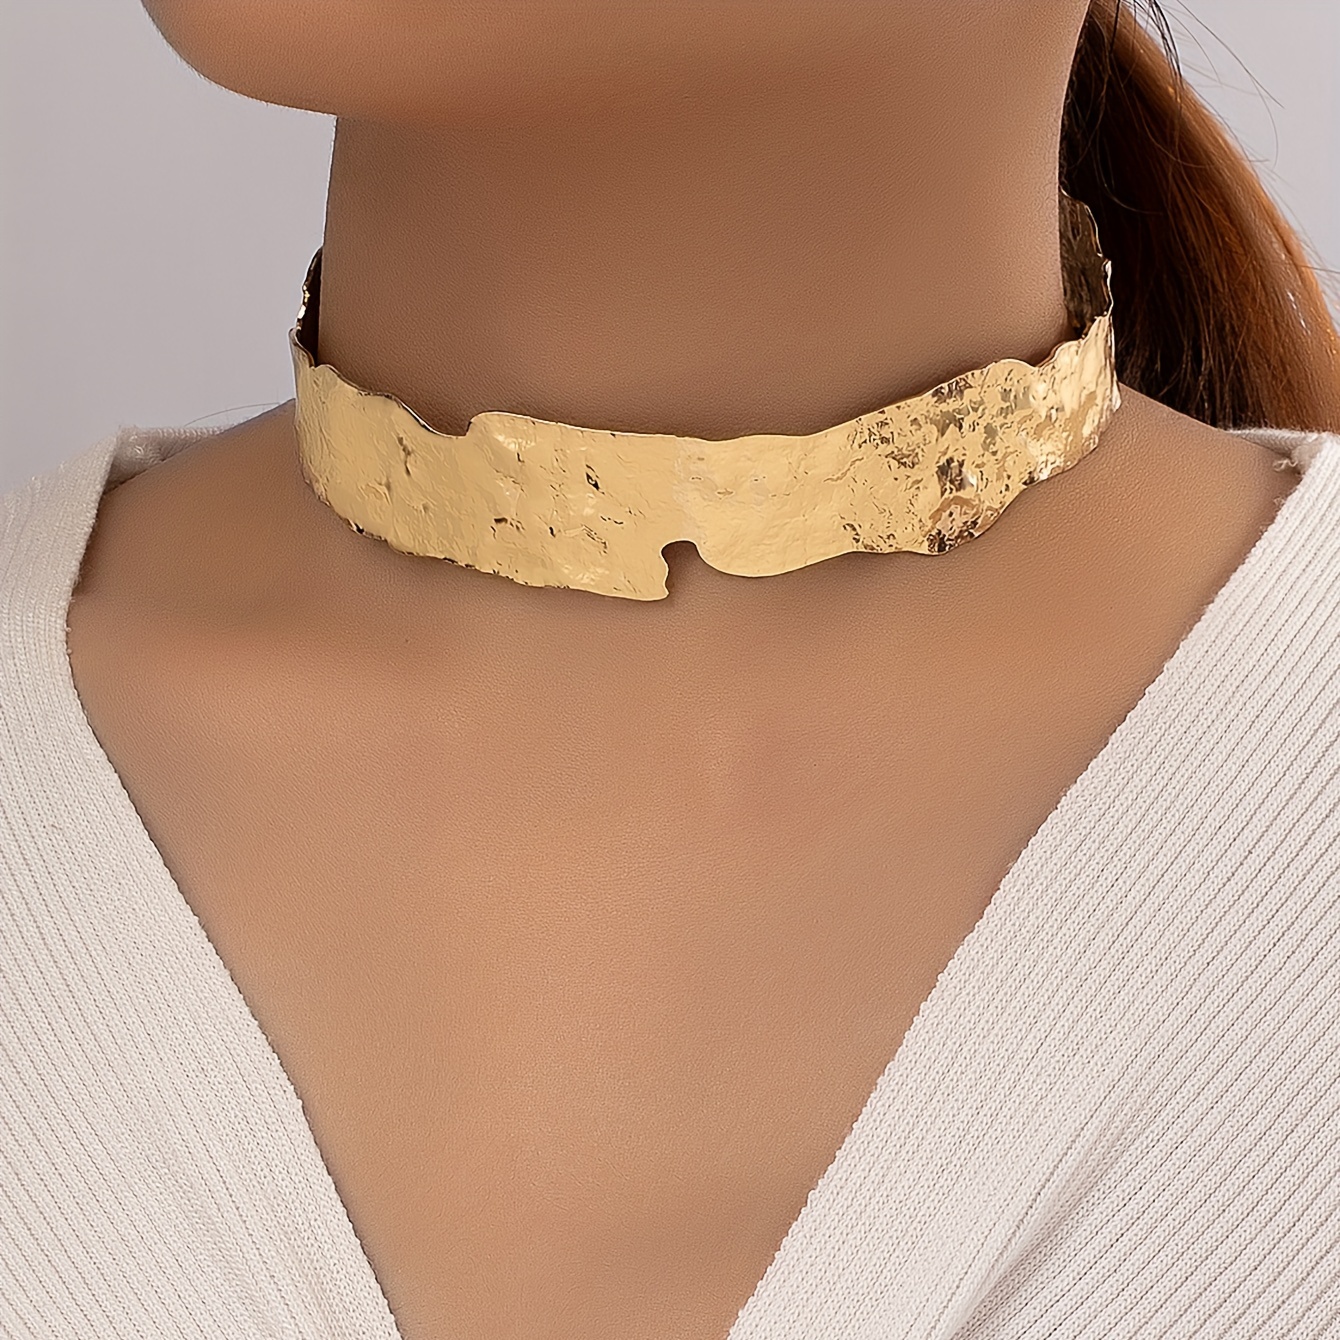 Lava Shape Linked Irregular Choker Necklace Twisted 18K Gold Plated Necklaces for Women Vintage Statement Jewelry Gold Chunky Links Necklace